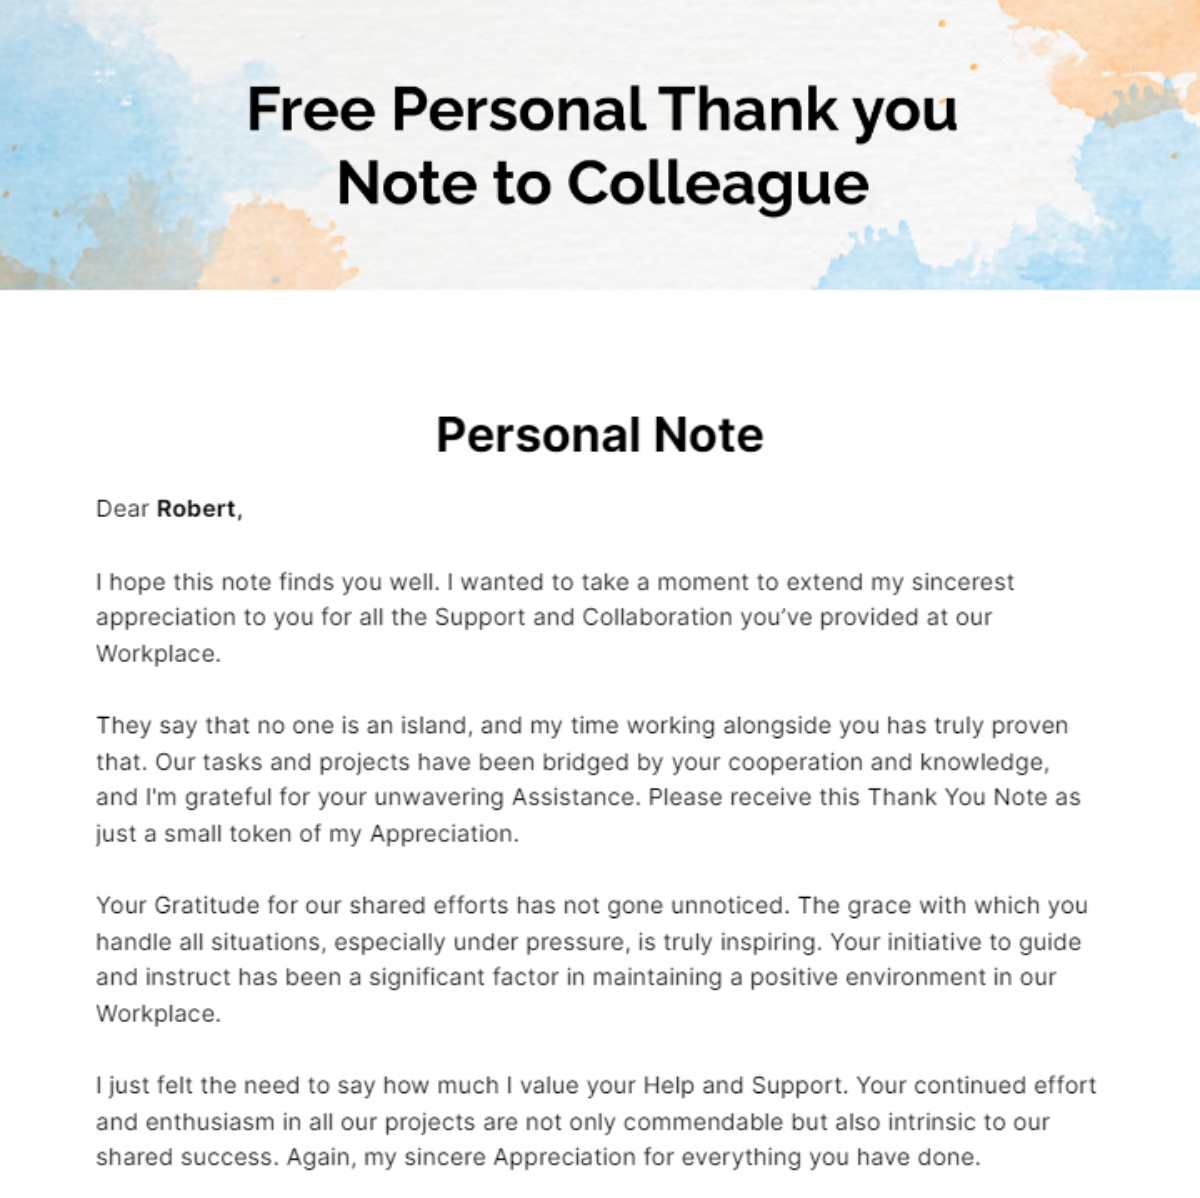 Free Personal Thank you Note to Colleague Template